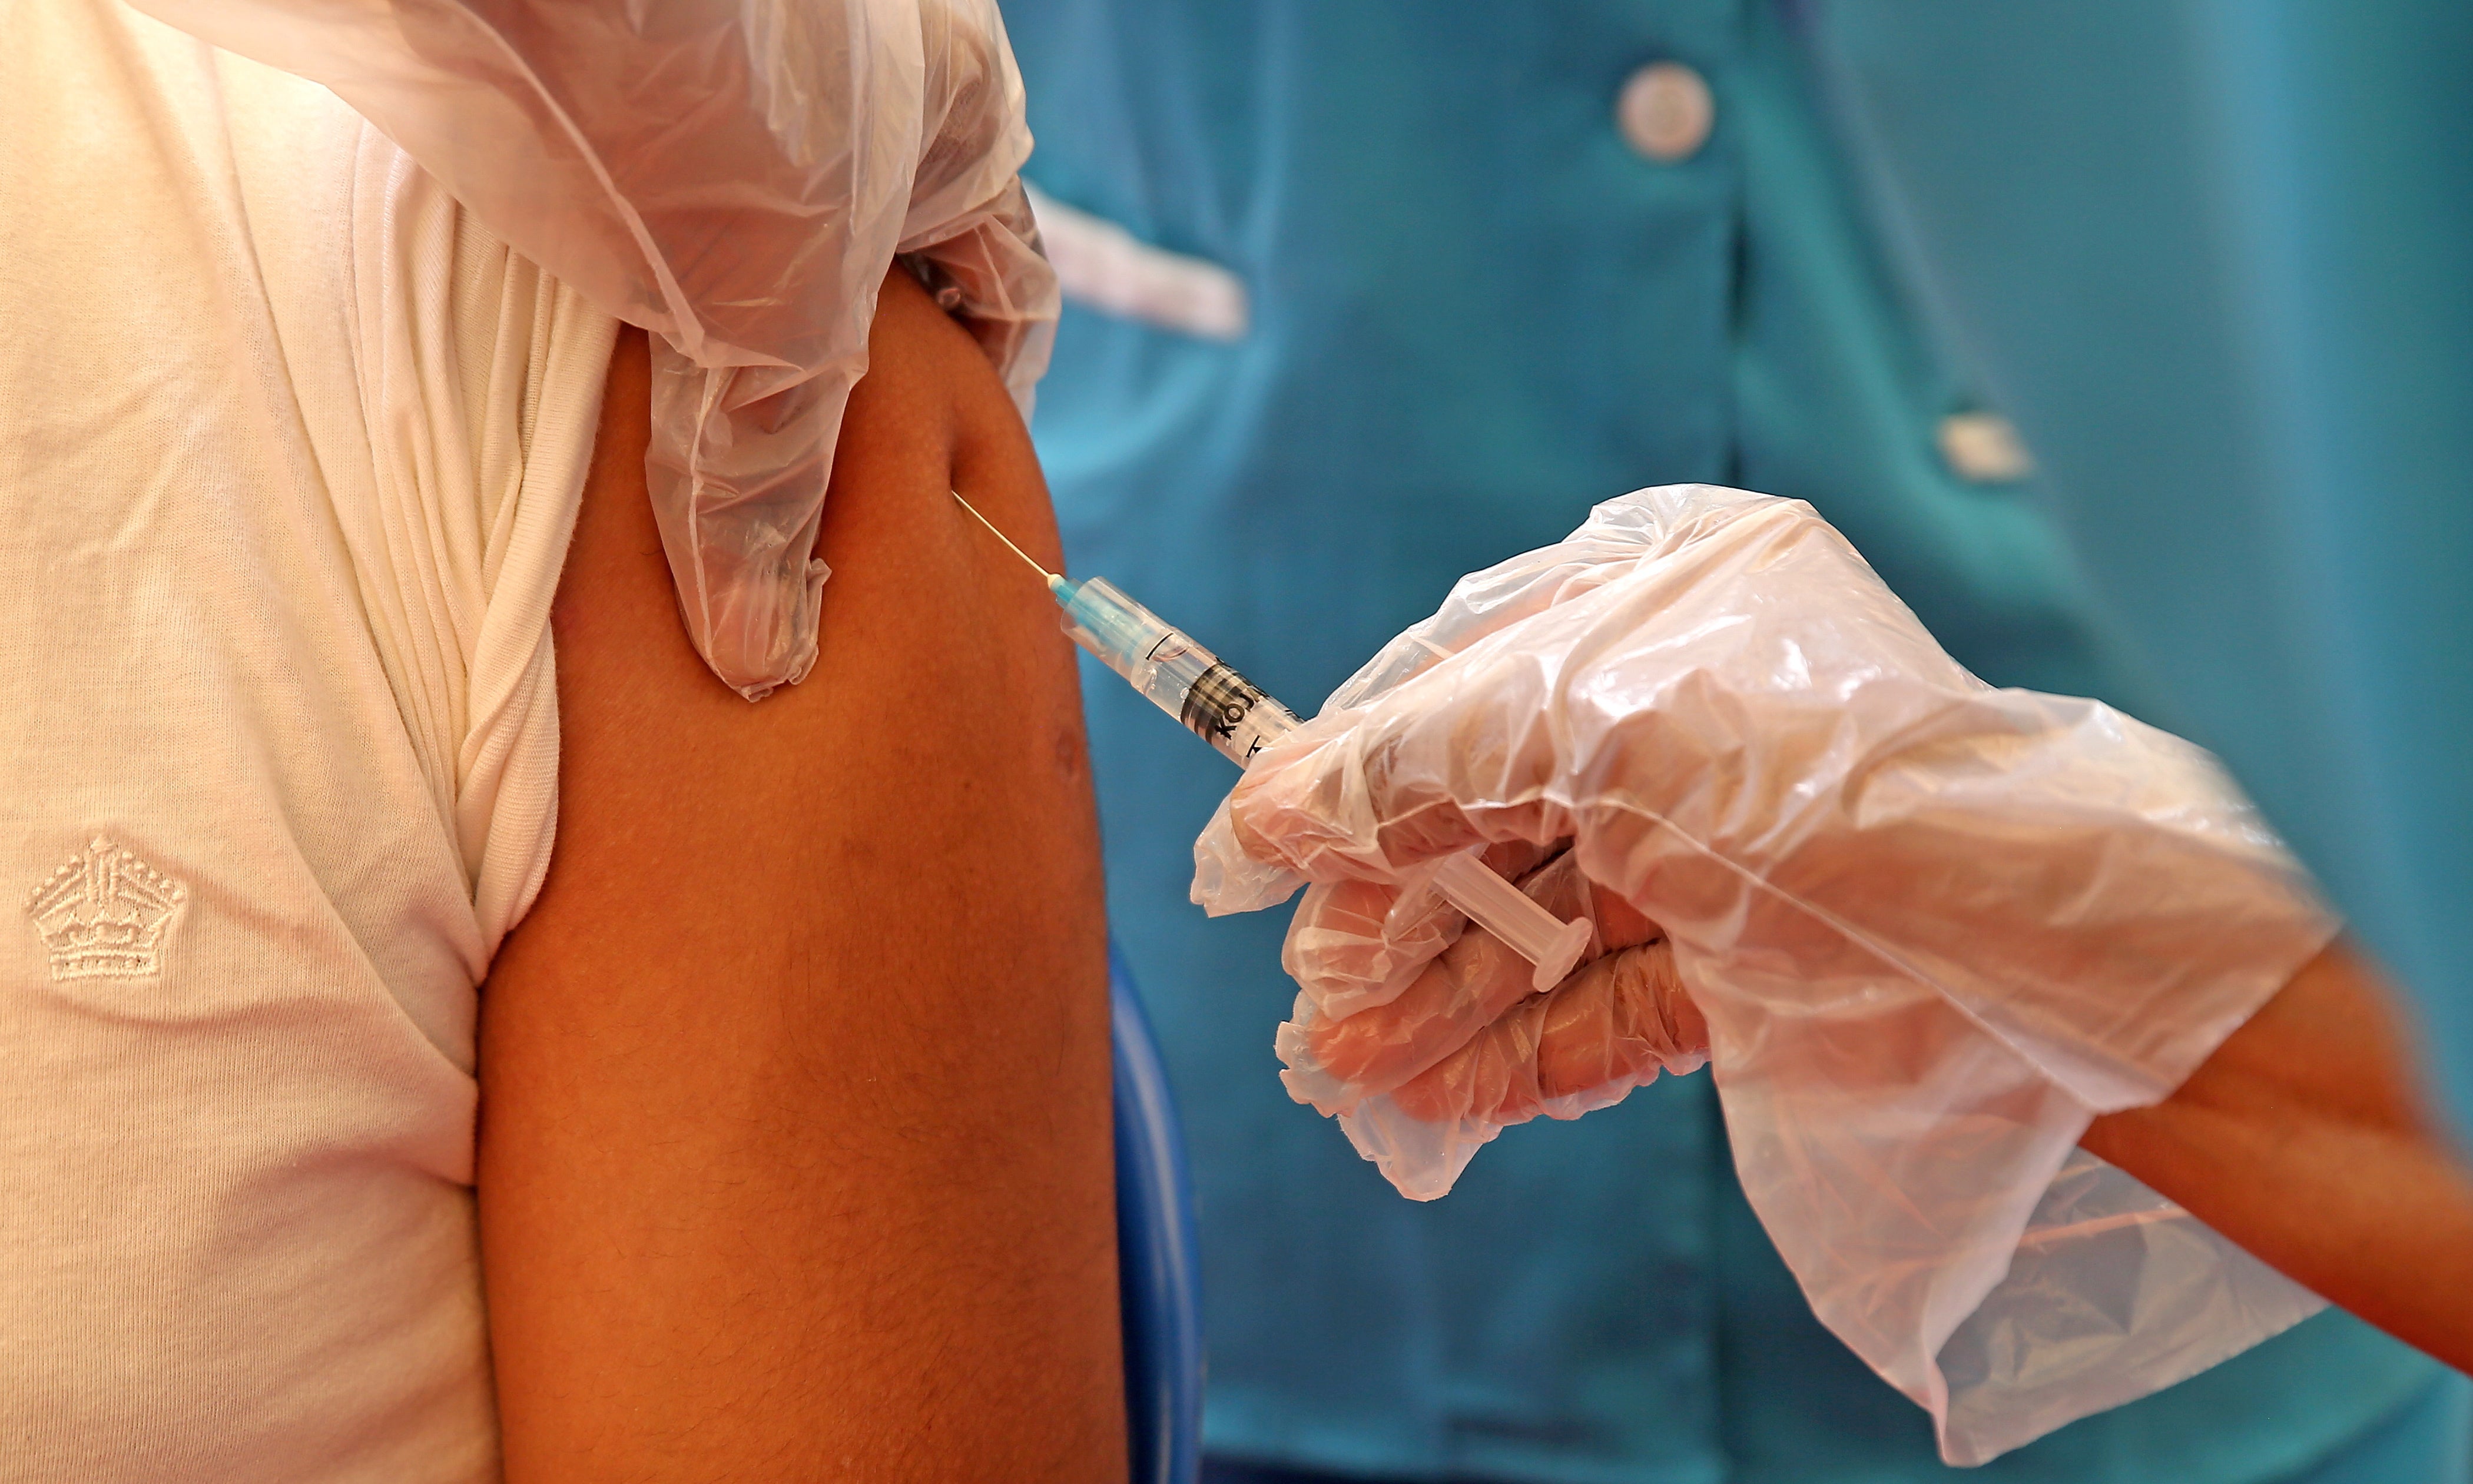 A man receives a shot of a Covid-19 vaccine during an inoculation drive in Bengaluru, India, on 10 June, 2021.